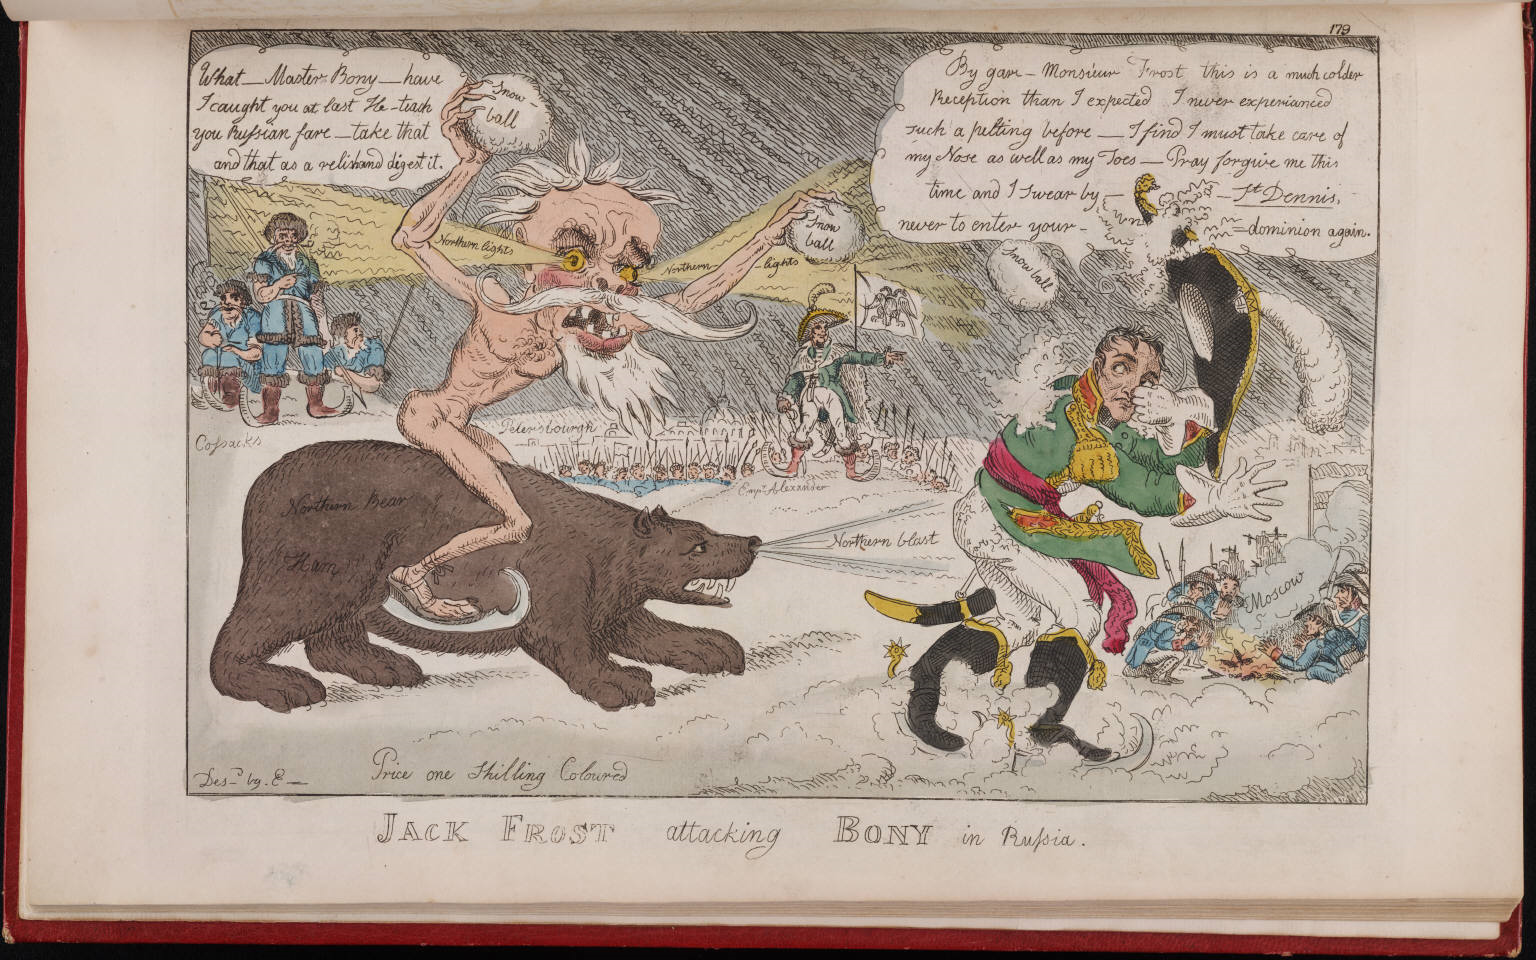 Jack Frost attacking Bony in Russia, by William Elmes.jpg